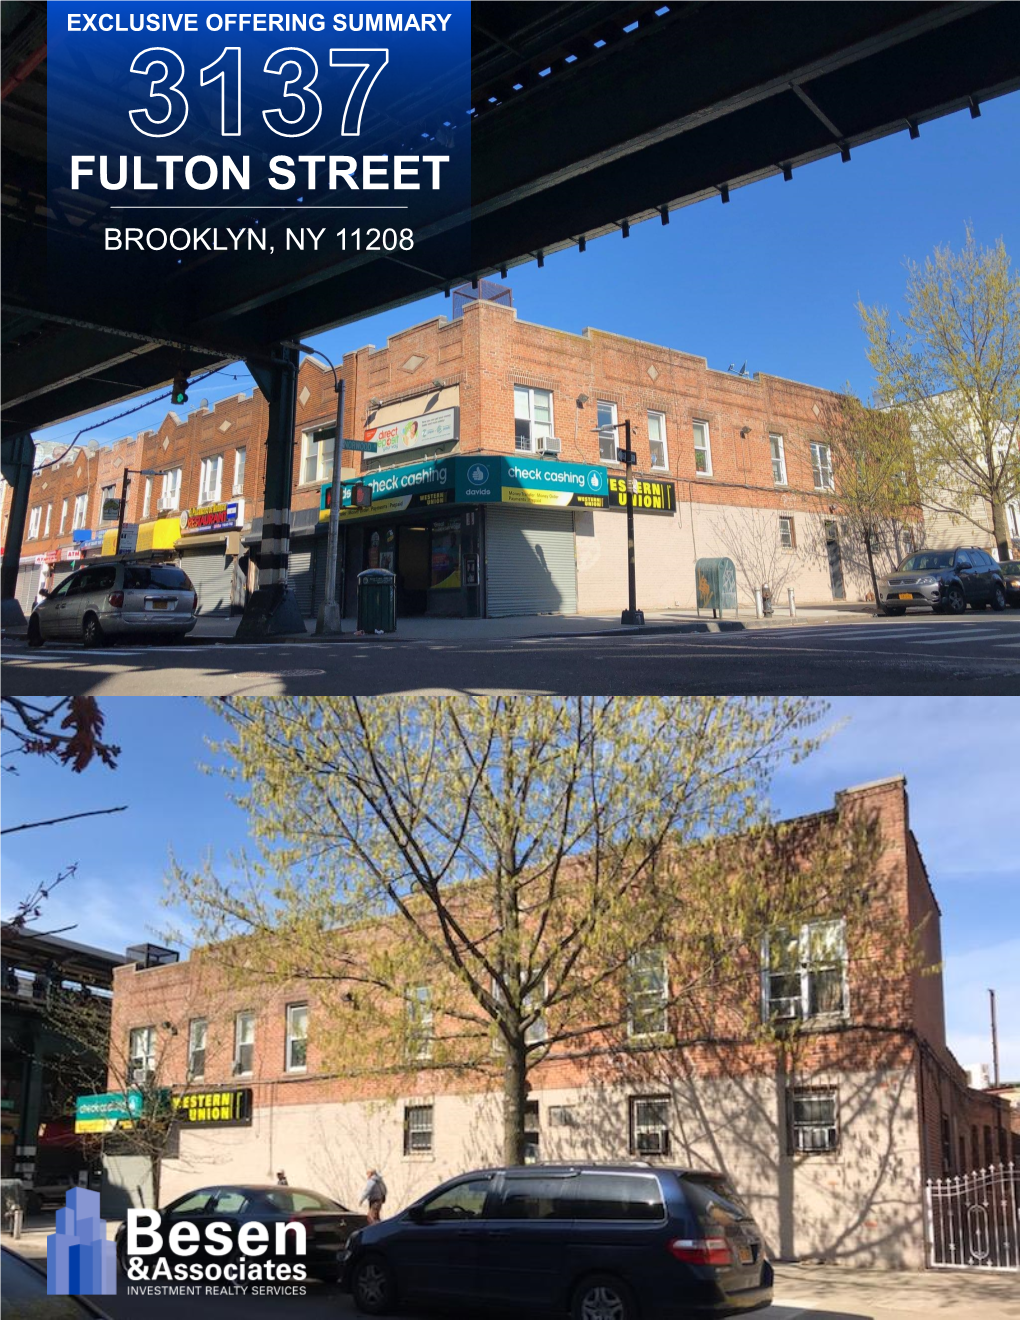 Fulton Street Brooklyn, Ny 11208 Cypress Hills Mixed Use Building for Sale | Exclusive Offering 3137 Fulton Street, Brooklyn, Ny 11208